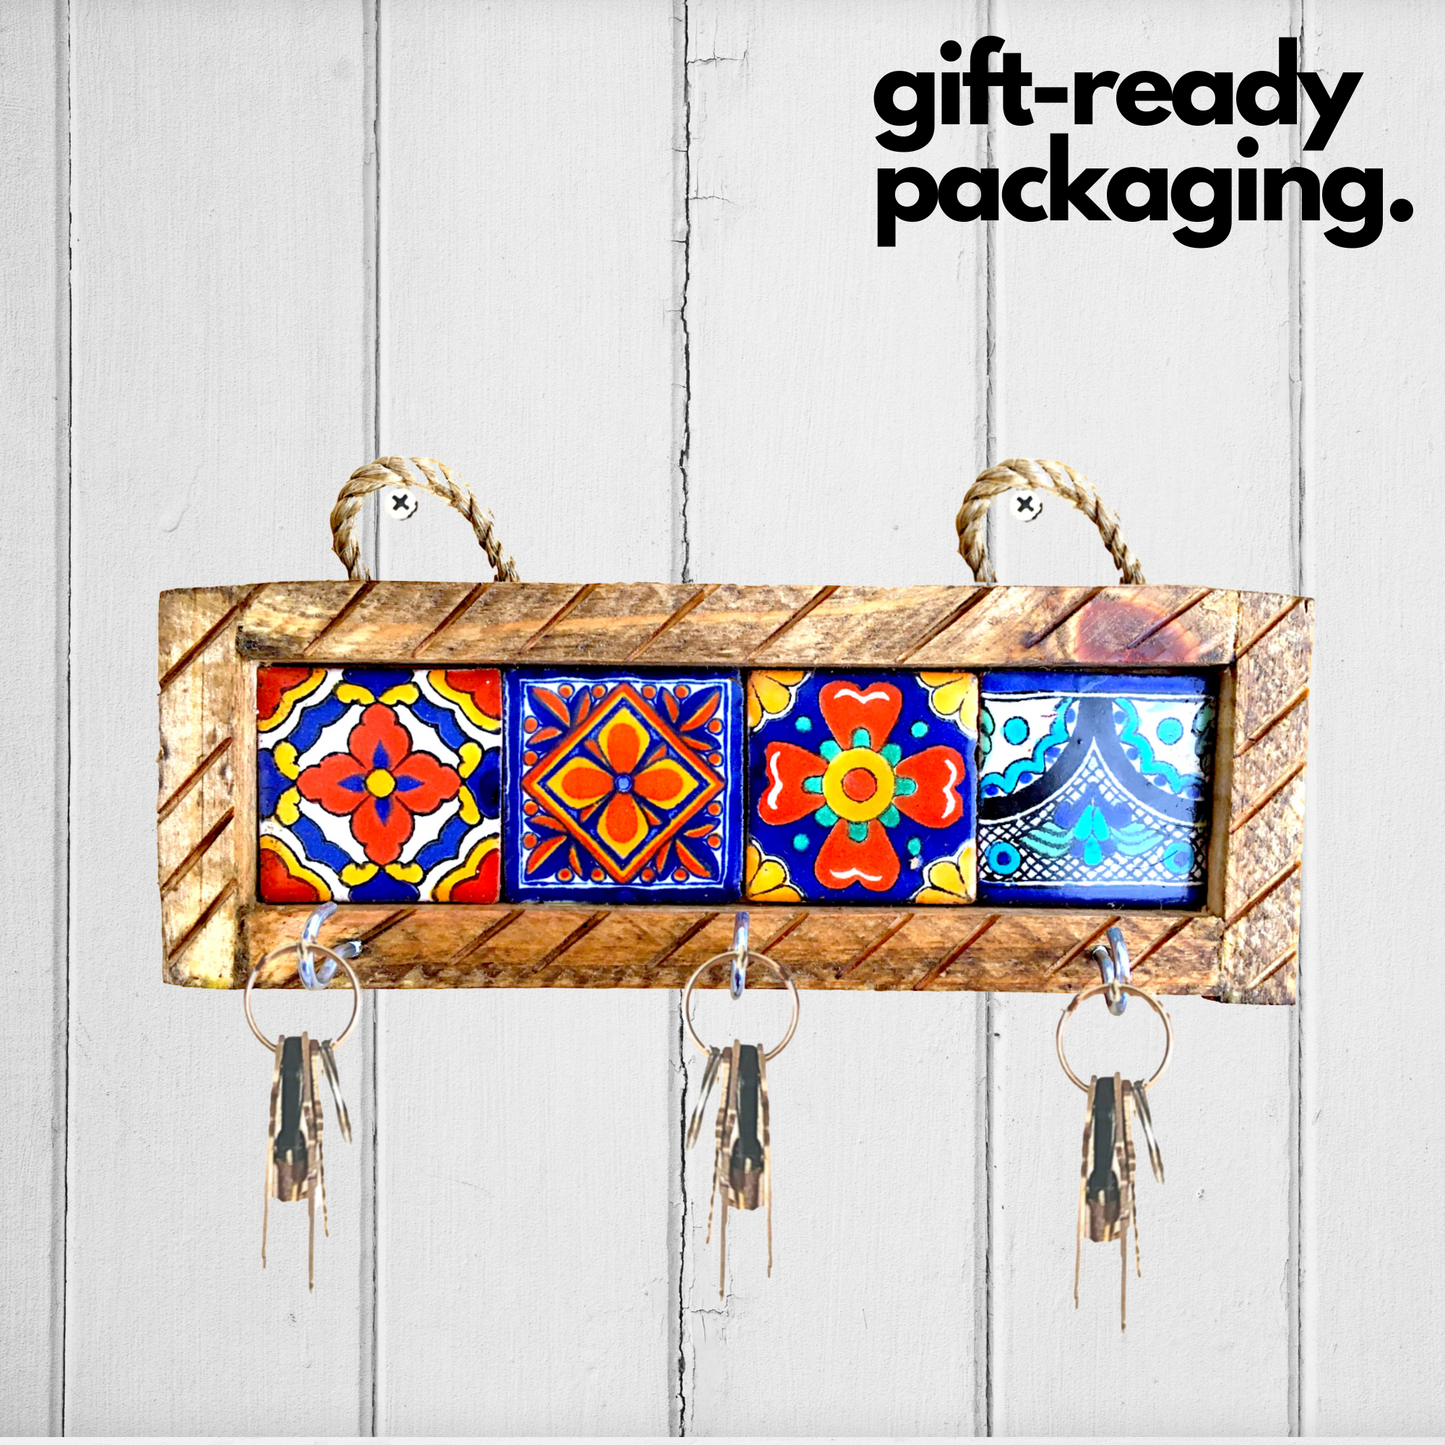 gift-ready packaging Handmade Mexican Talavera Tiles Key Holder, perfect for key organization and for adding vibrant Mexican style to your home.